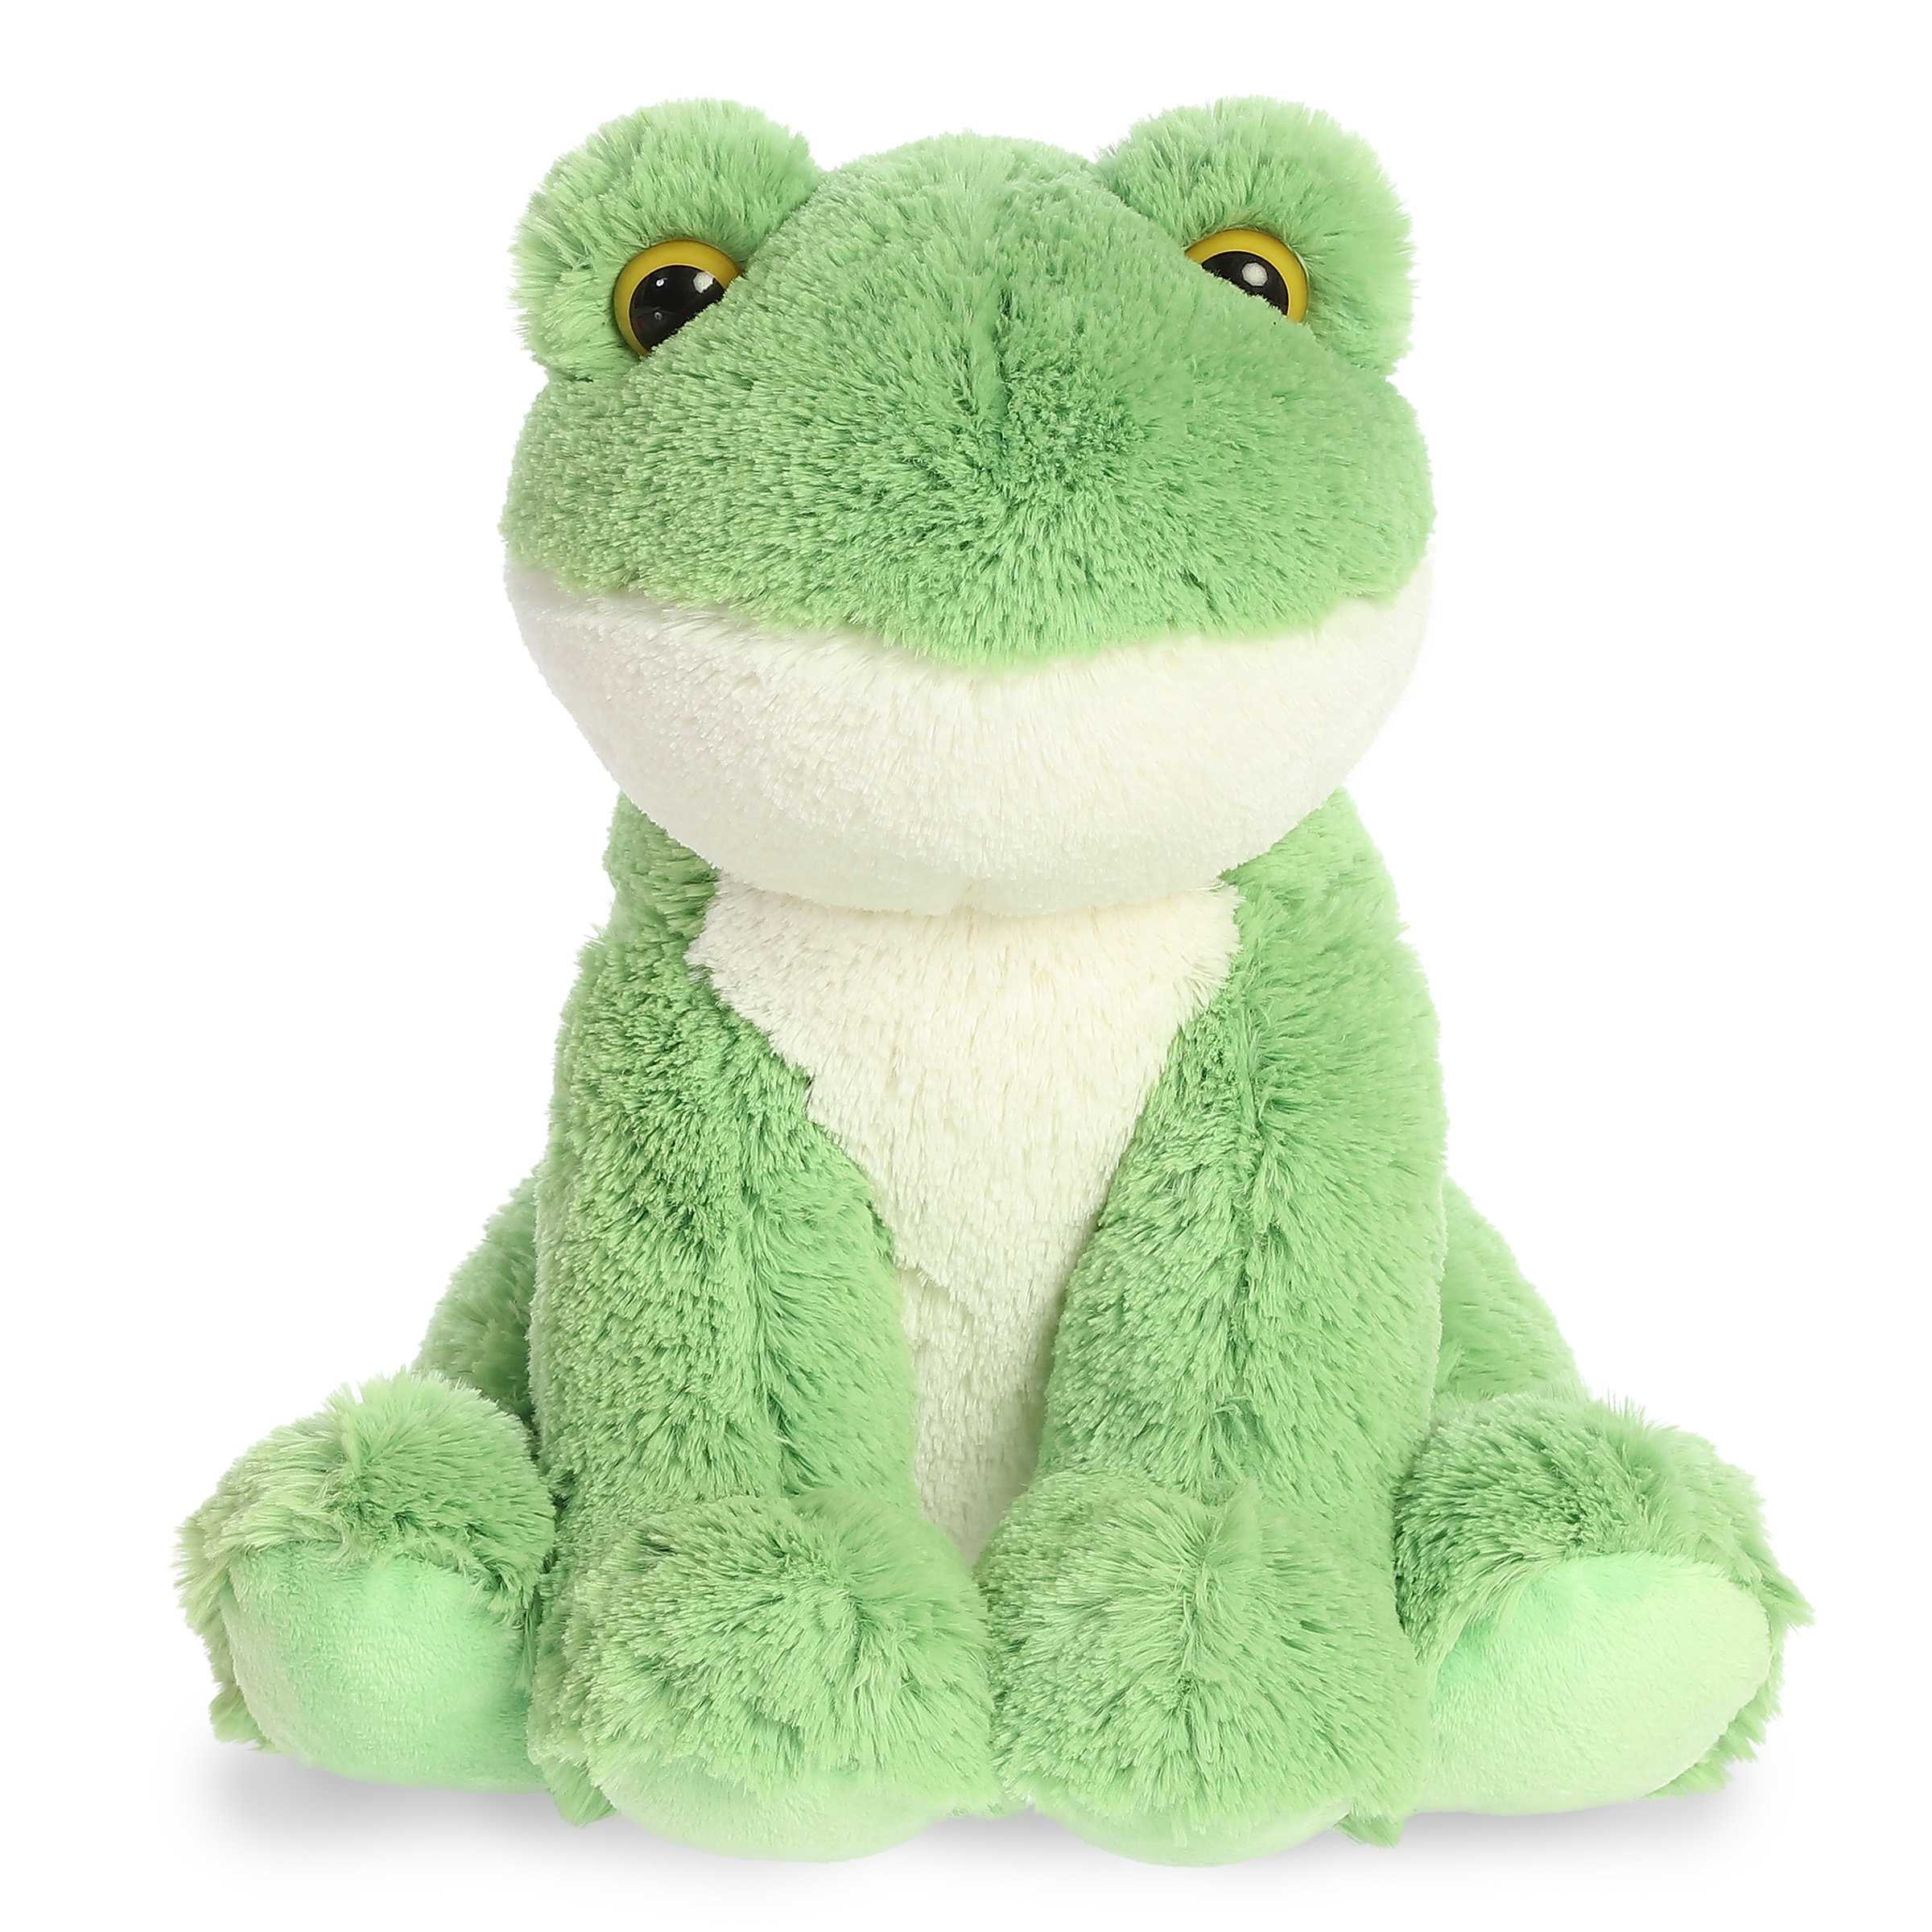 Aurora Frog Plush by Aurora Stuffed Animals in green with a friendly face, ideal for cuddling.